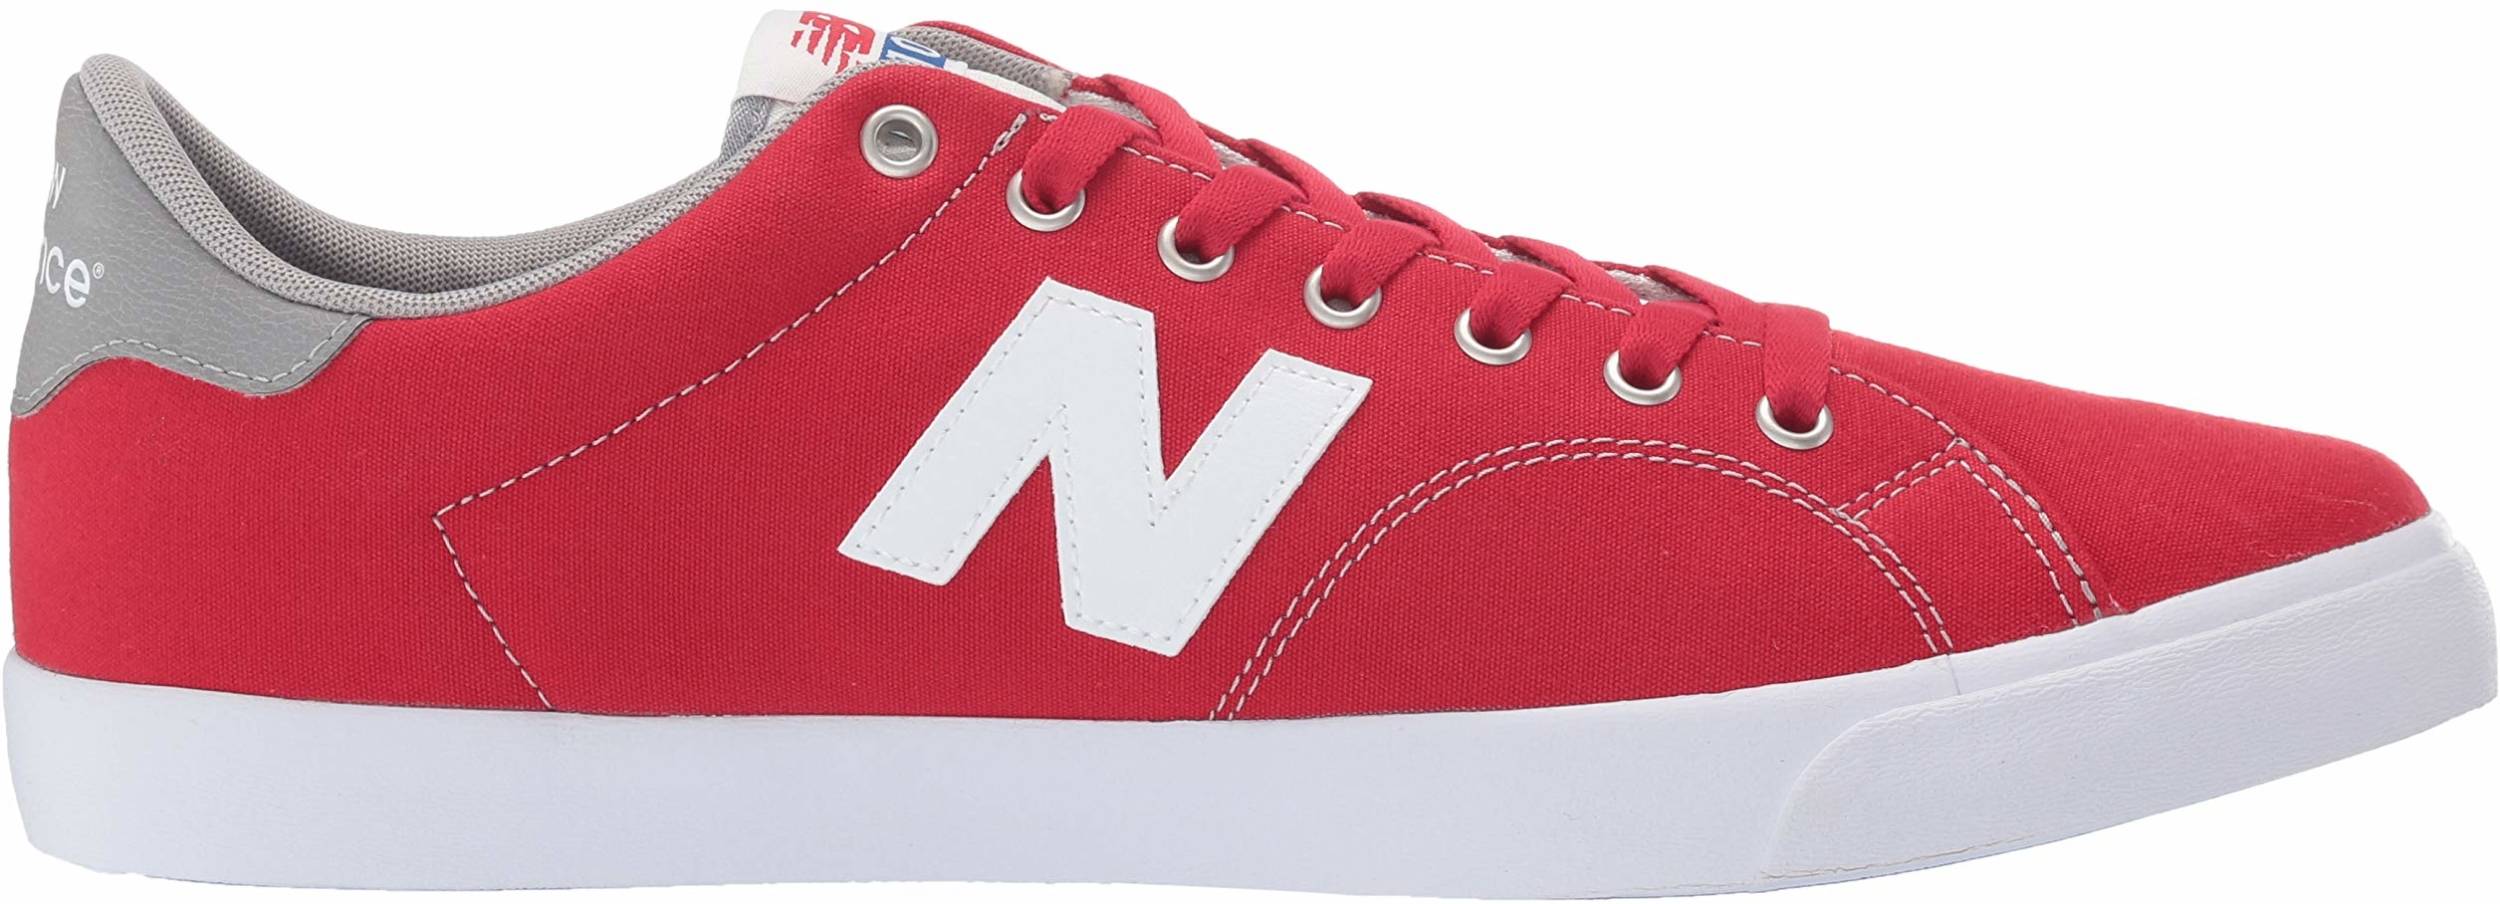 all red new balance